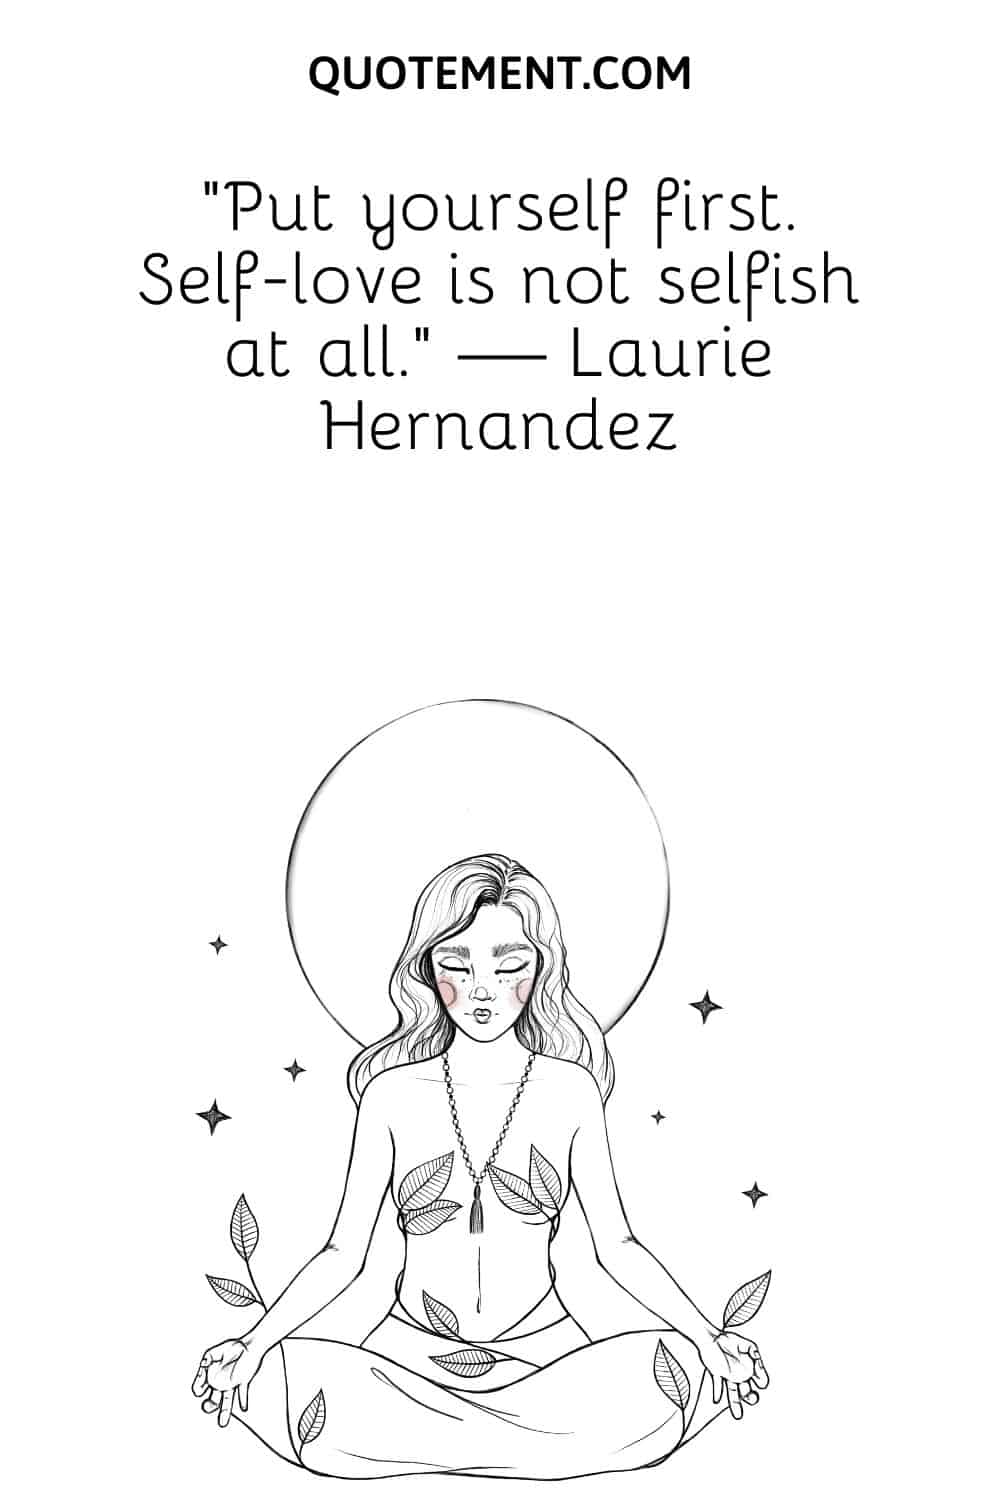 Put yourself first. Self-love is not selfish at all.